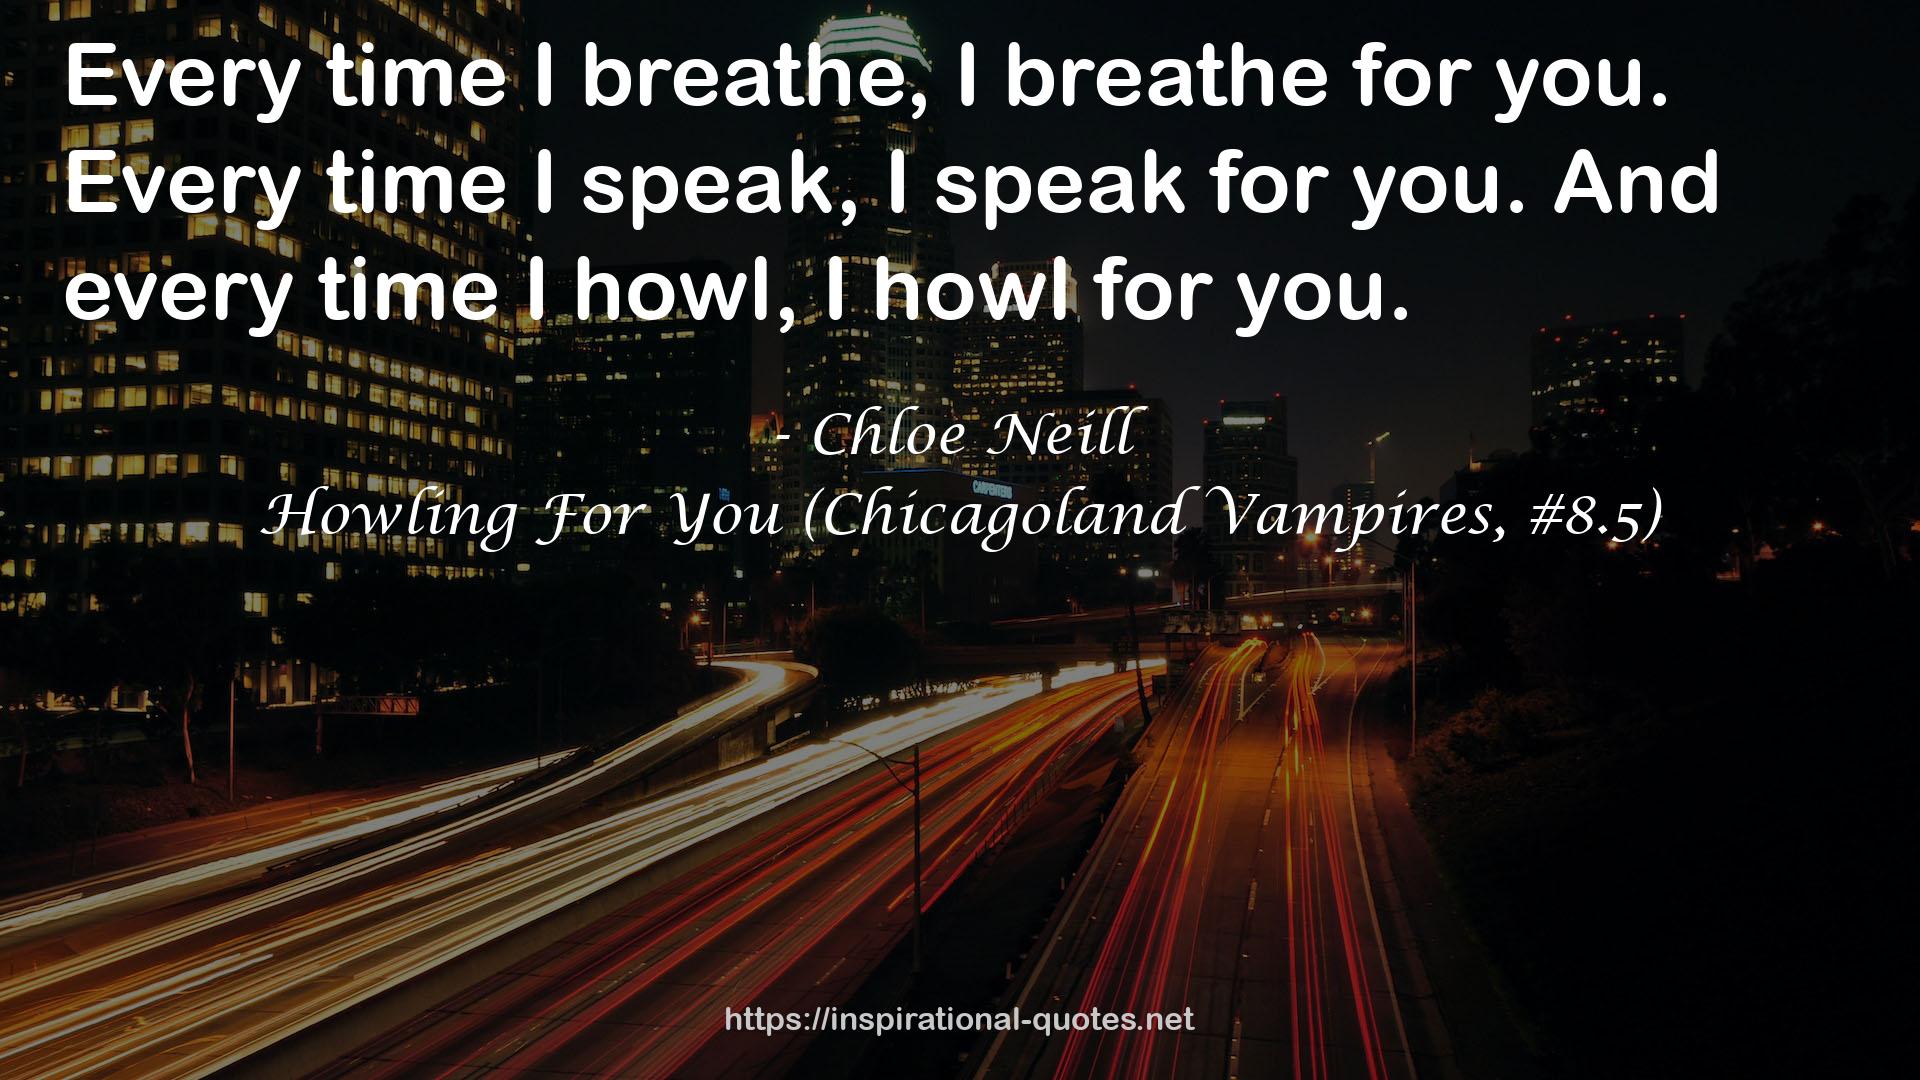 Howling For You (Chicagoland Vampires, #8.5) QUOTES